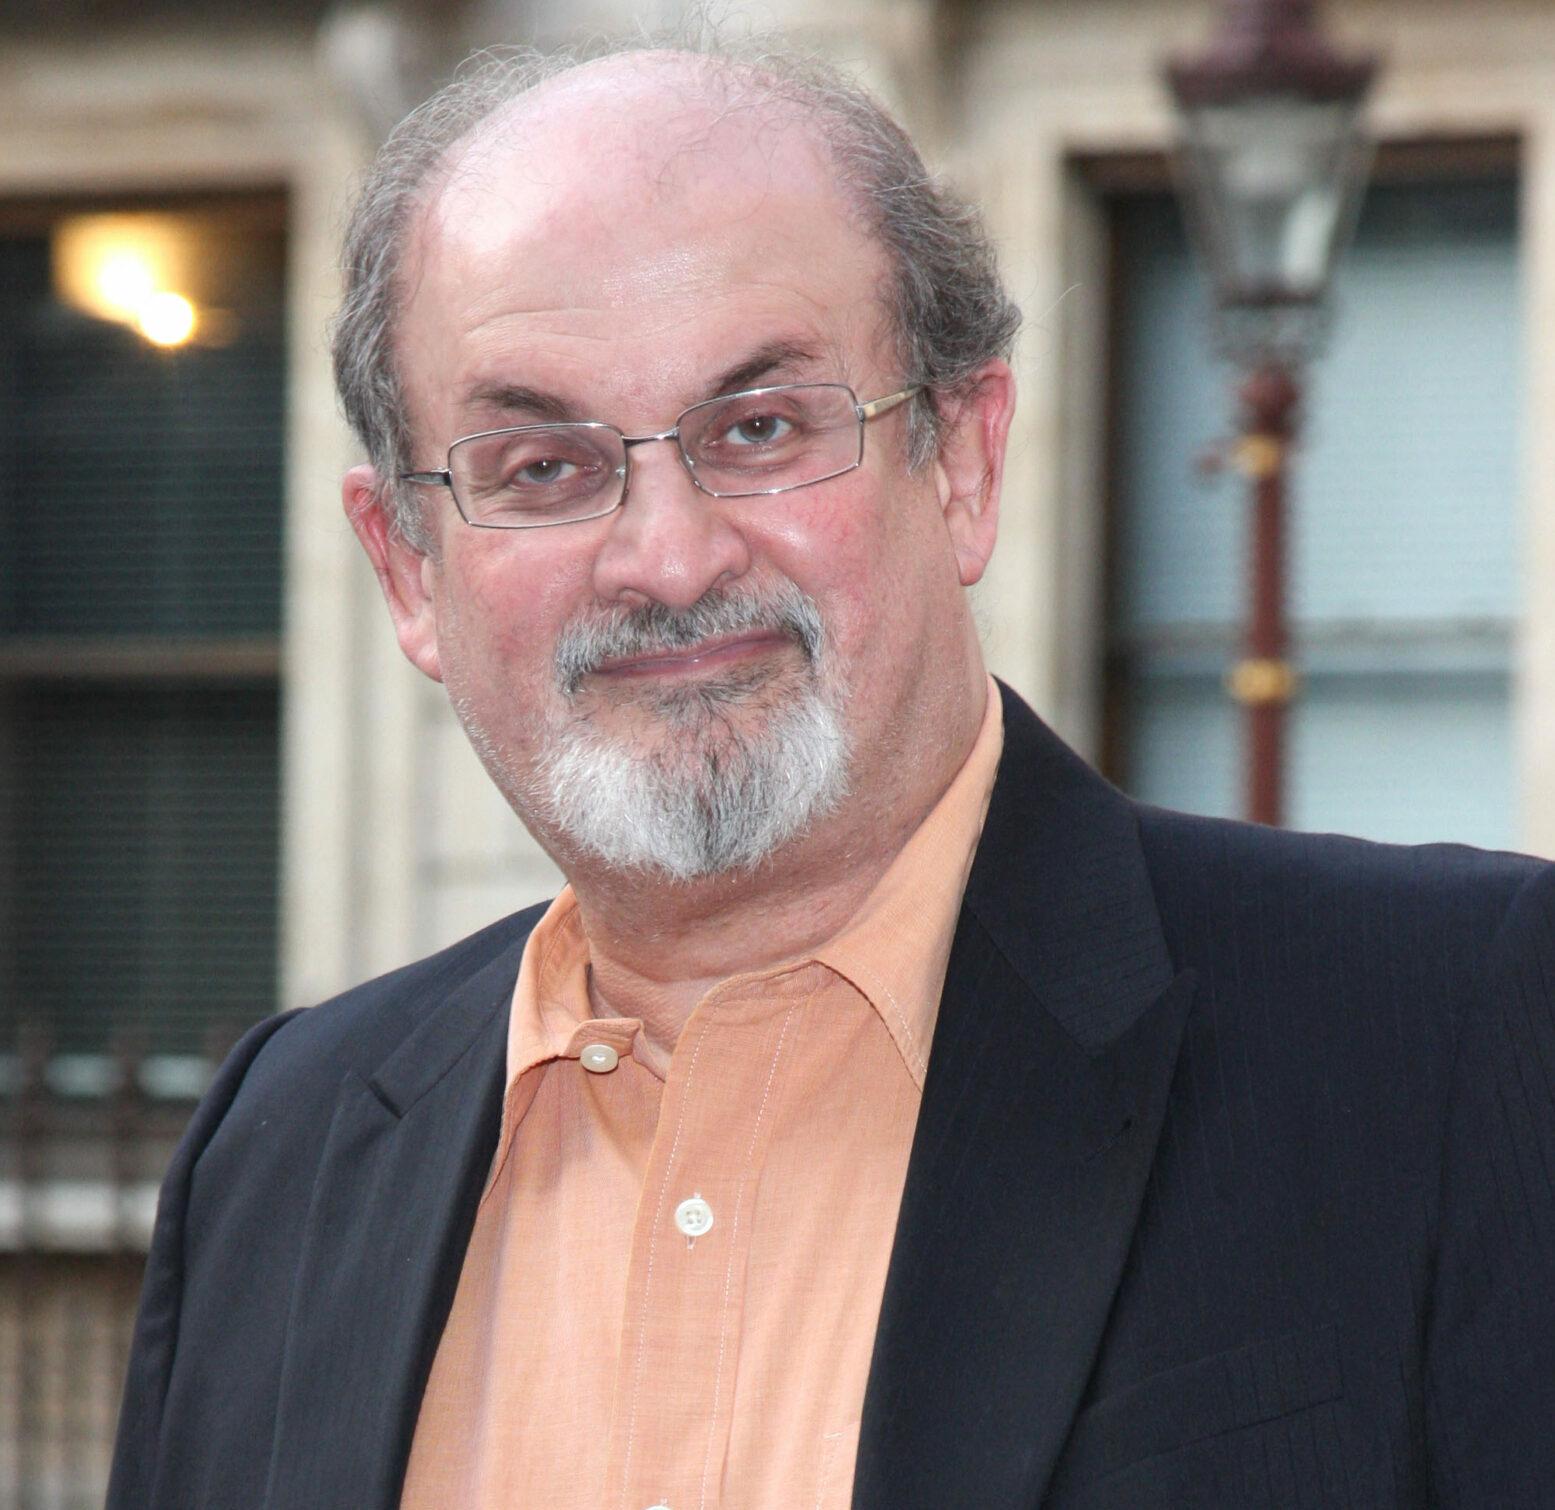 Salman Rushdie Arrivals at the Royal Academy Summer Exhibition 2012 - preview party held at the Royal Academy of Arts, London, England.